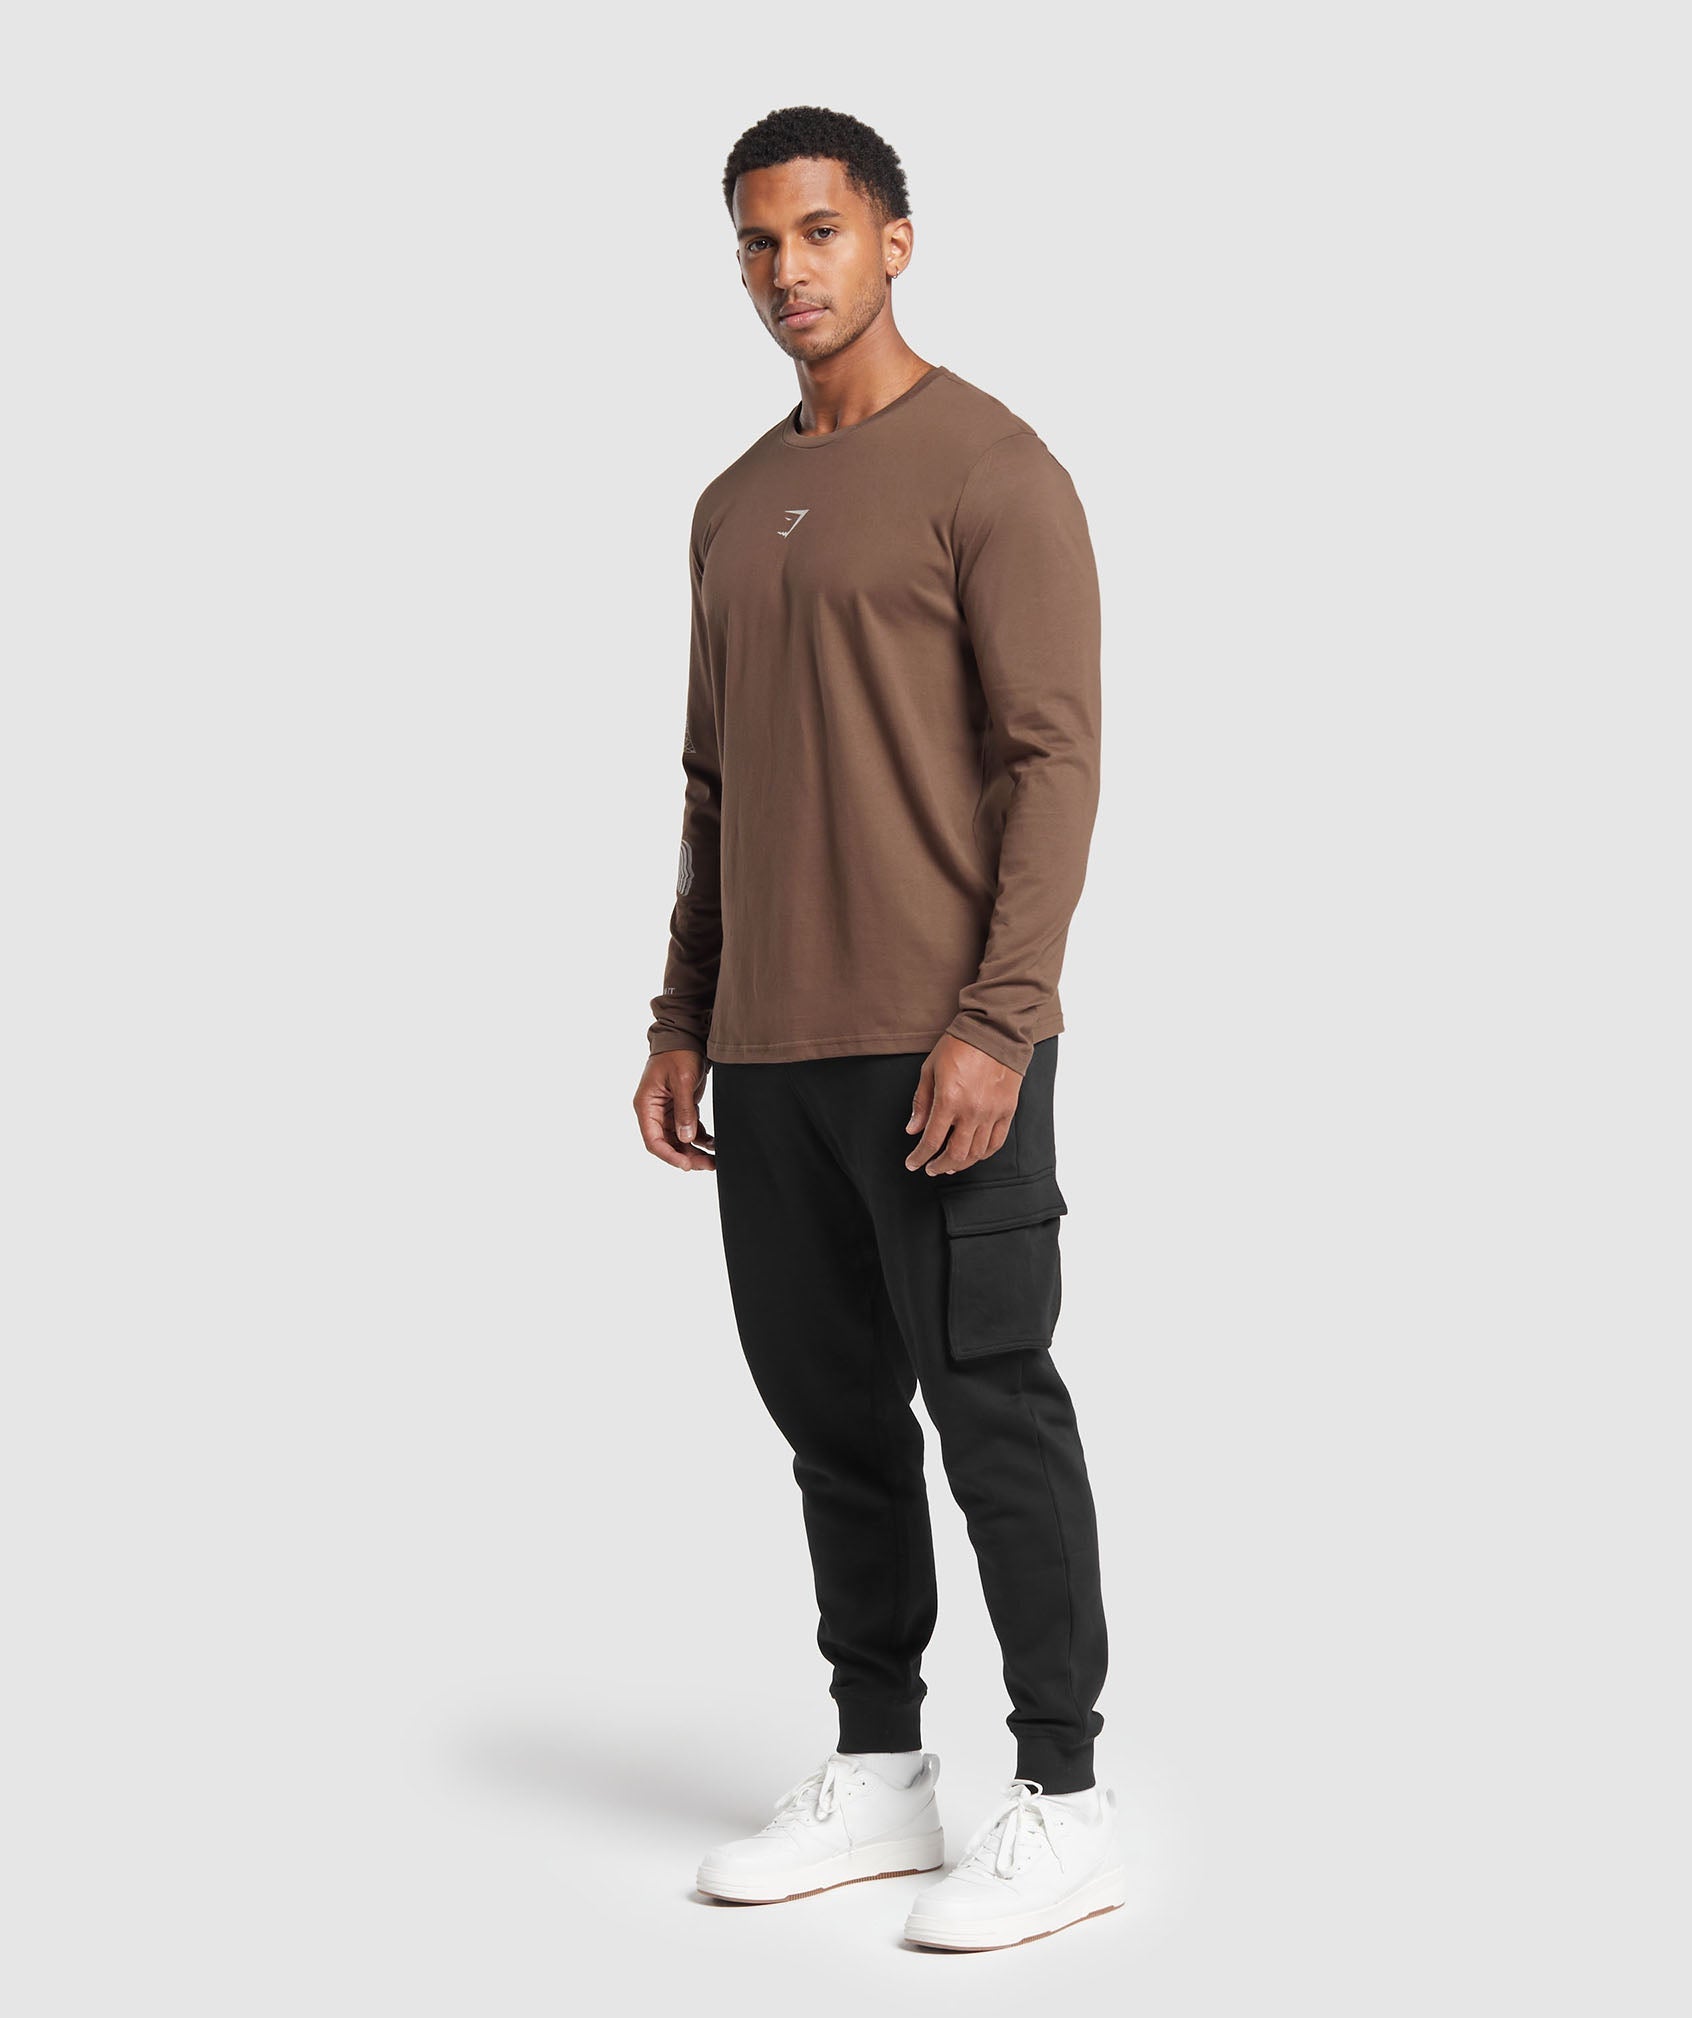 Hybrid Wellness Long Sleeve T-Shirt in Penny Brown - view 4